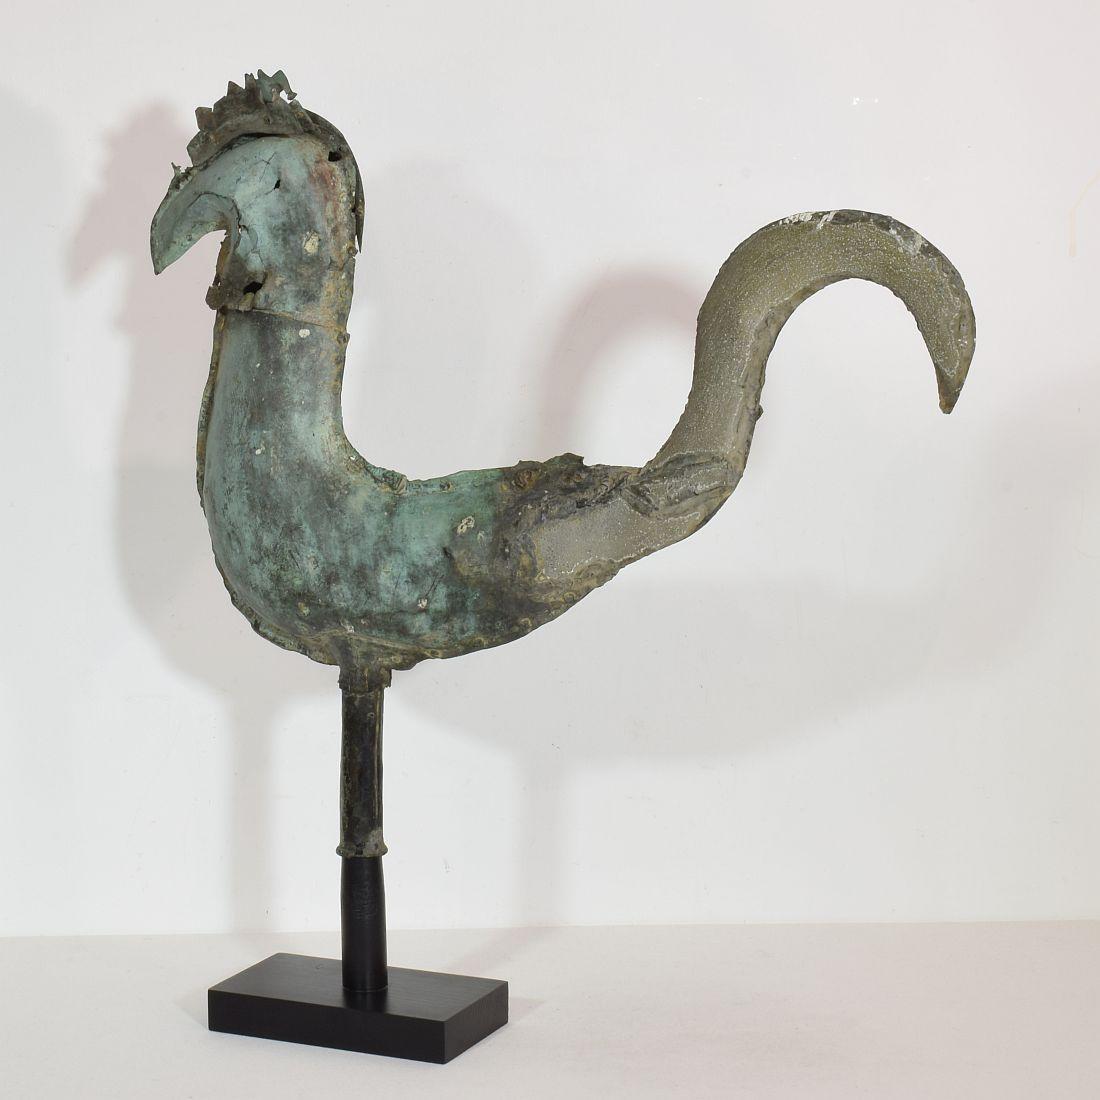 Hand-Crafted 18th-19th Century, French Folk Art Copper Rooster, Weathervane